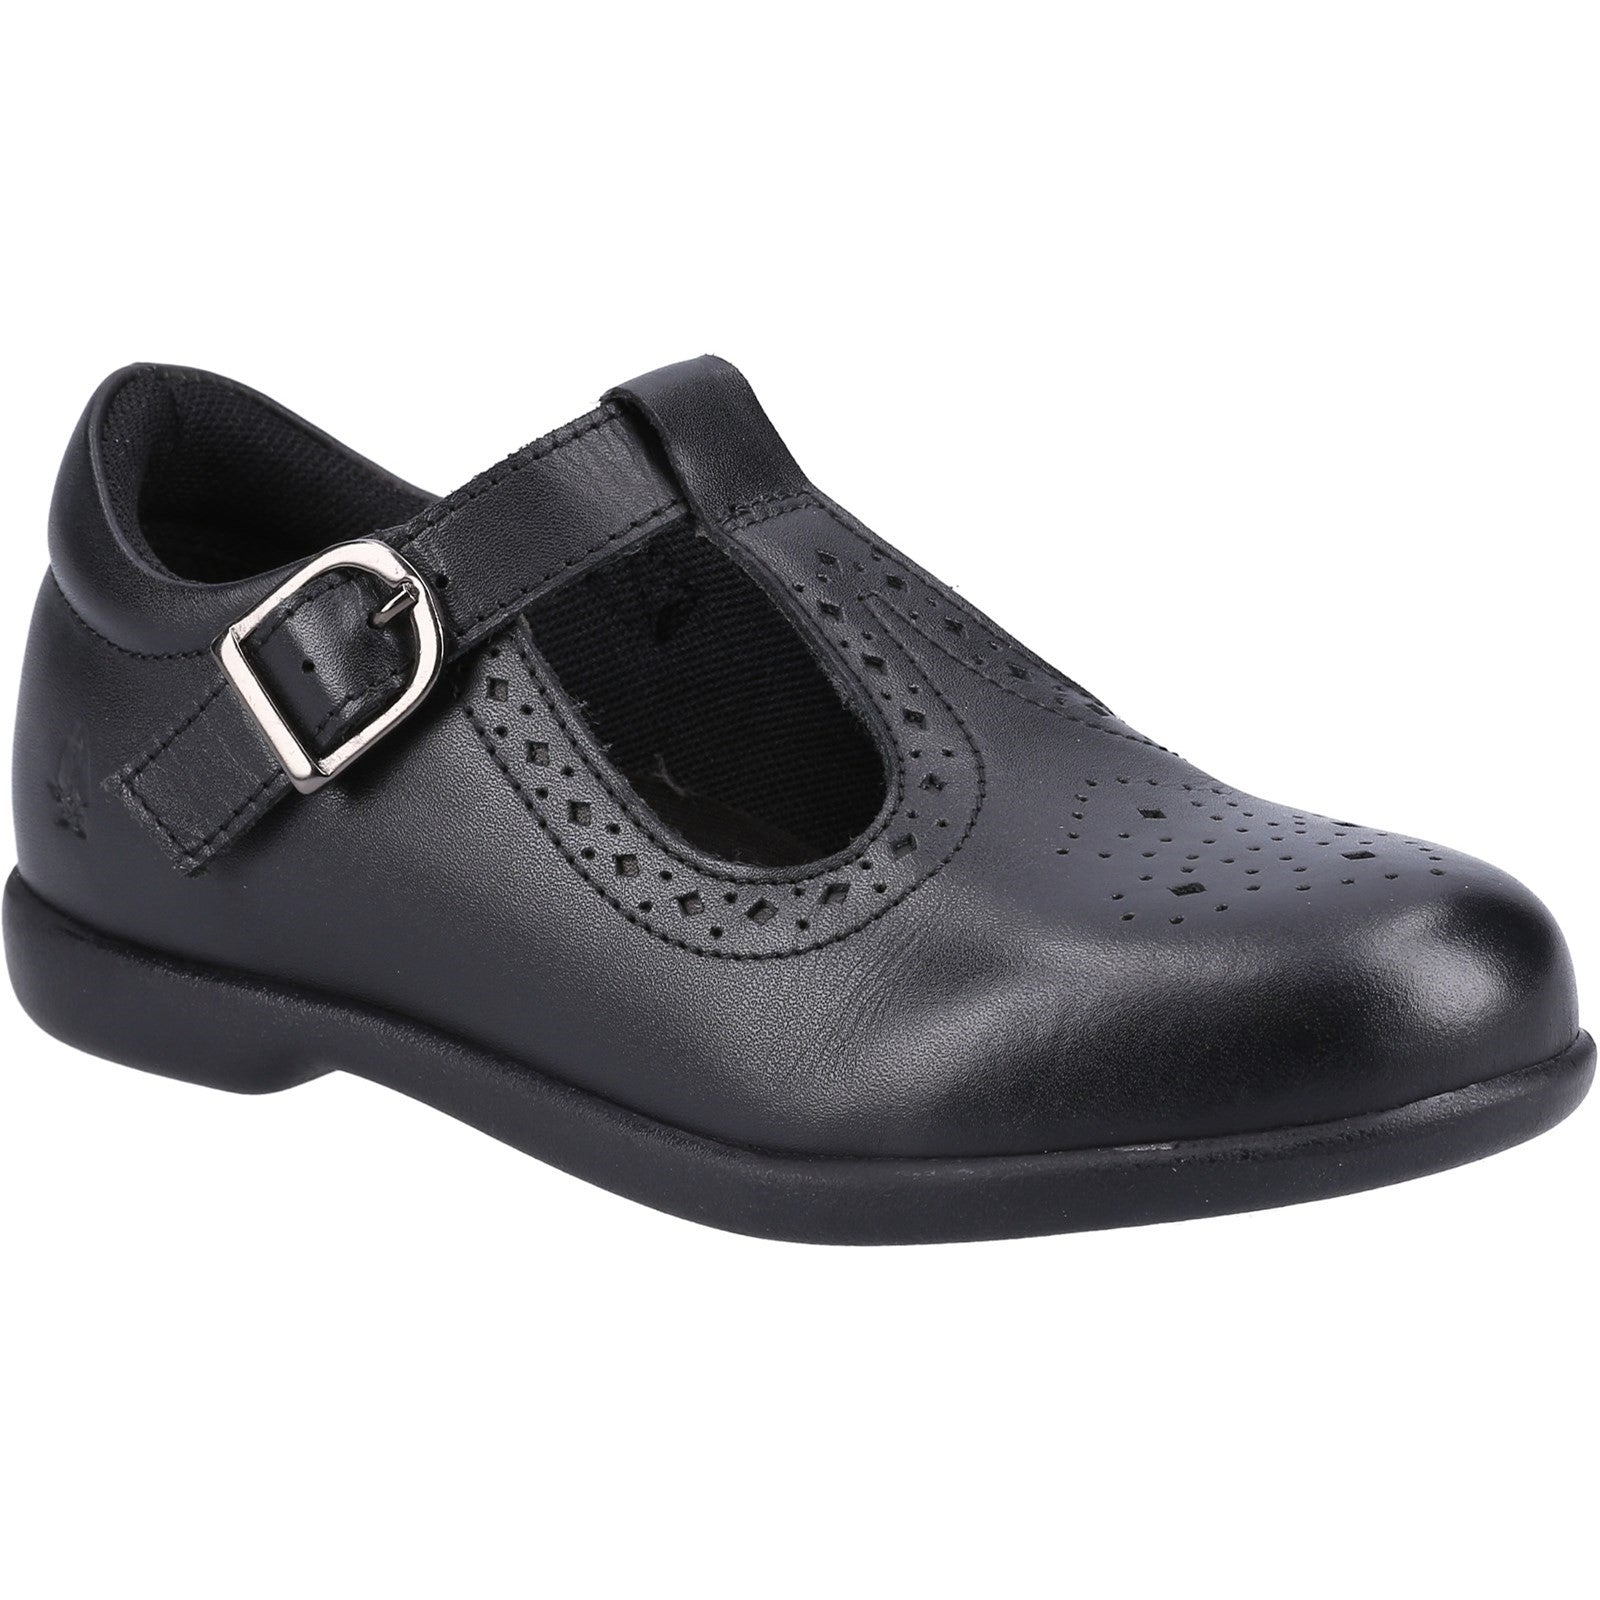 Hush Puppies Girls Britney Leather School Shoes - Black